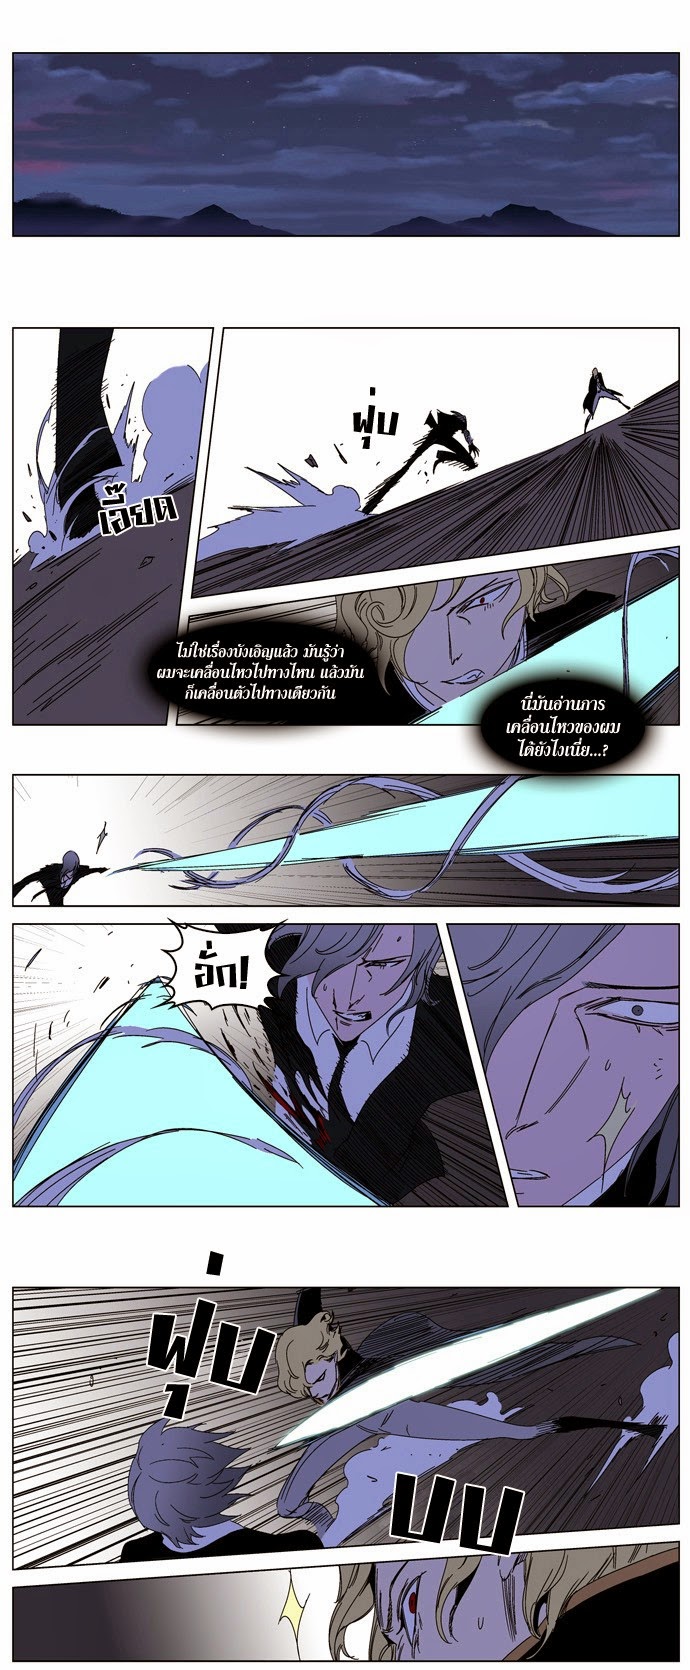 Noblesse 185 013